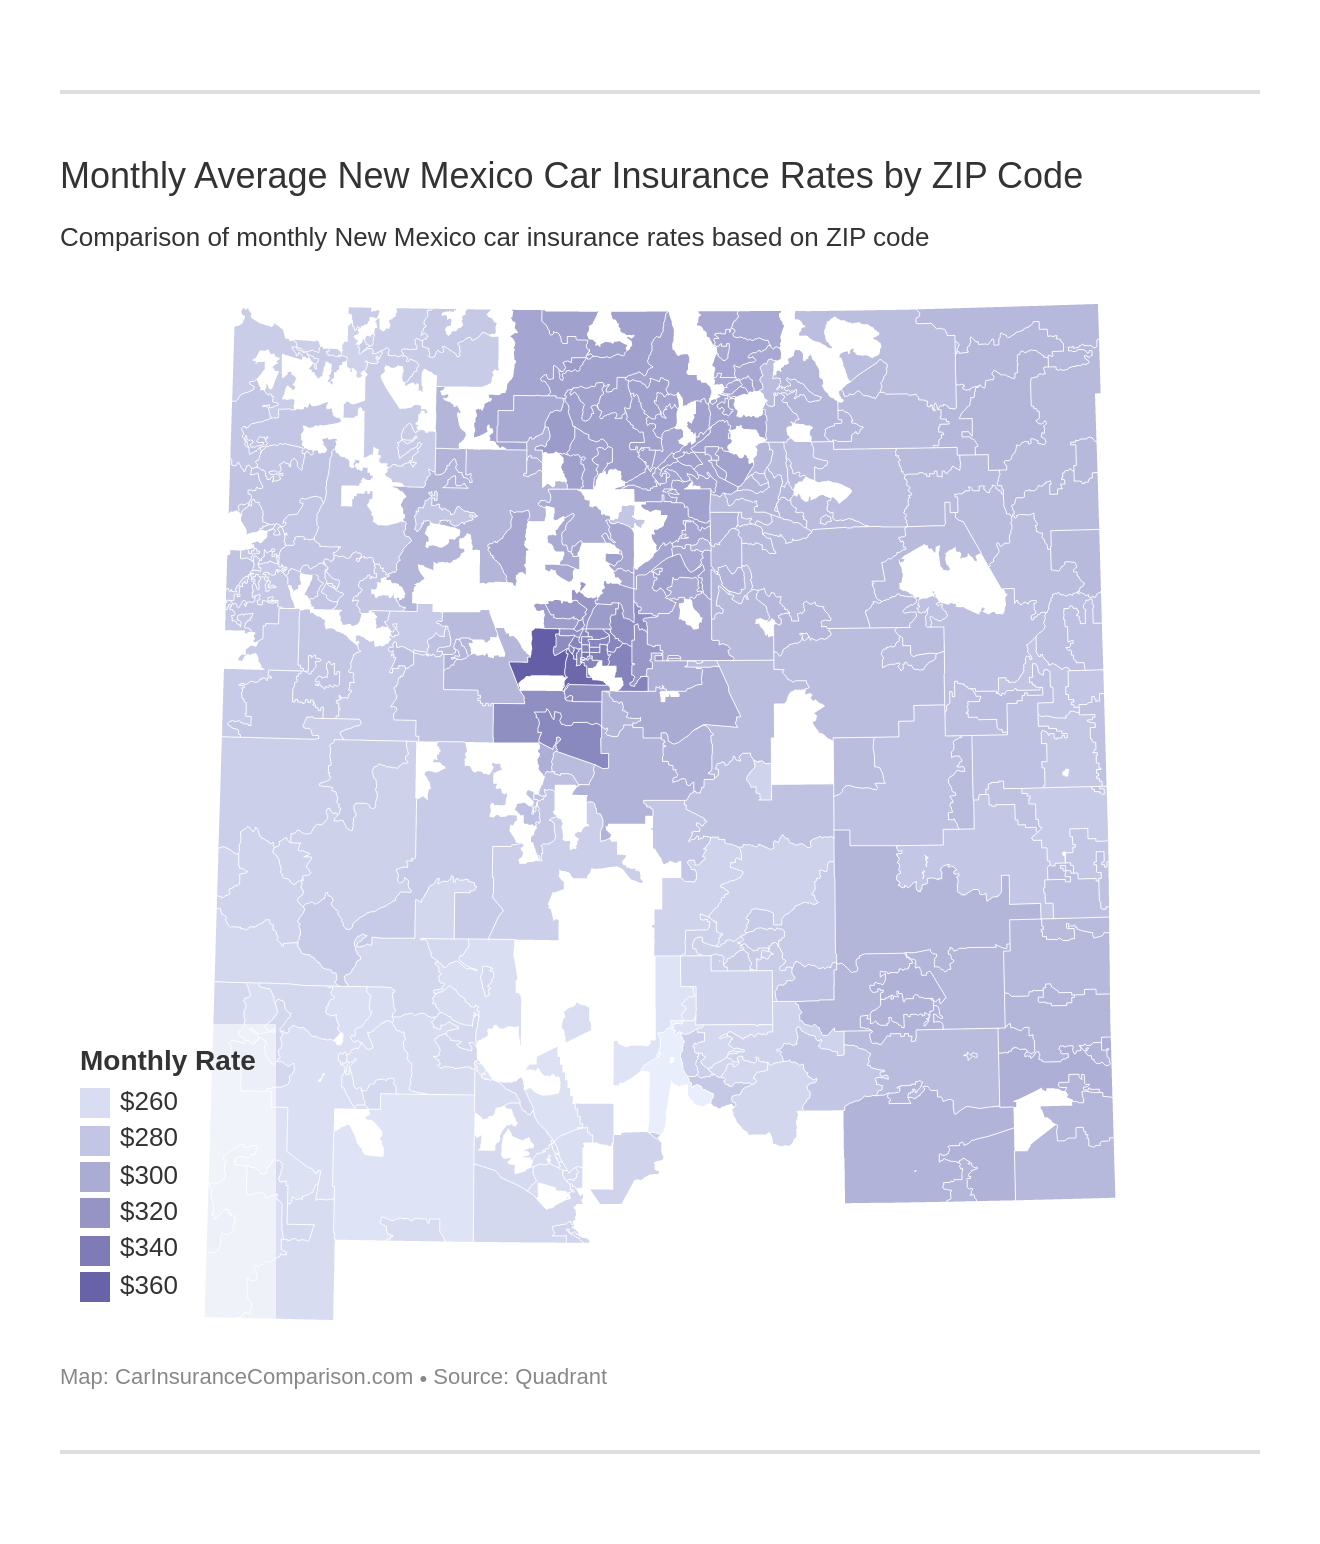 Monthly Average New Mexico Car Insurance Rates by ZIP Code